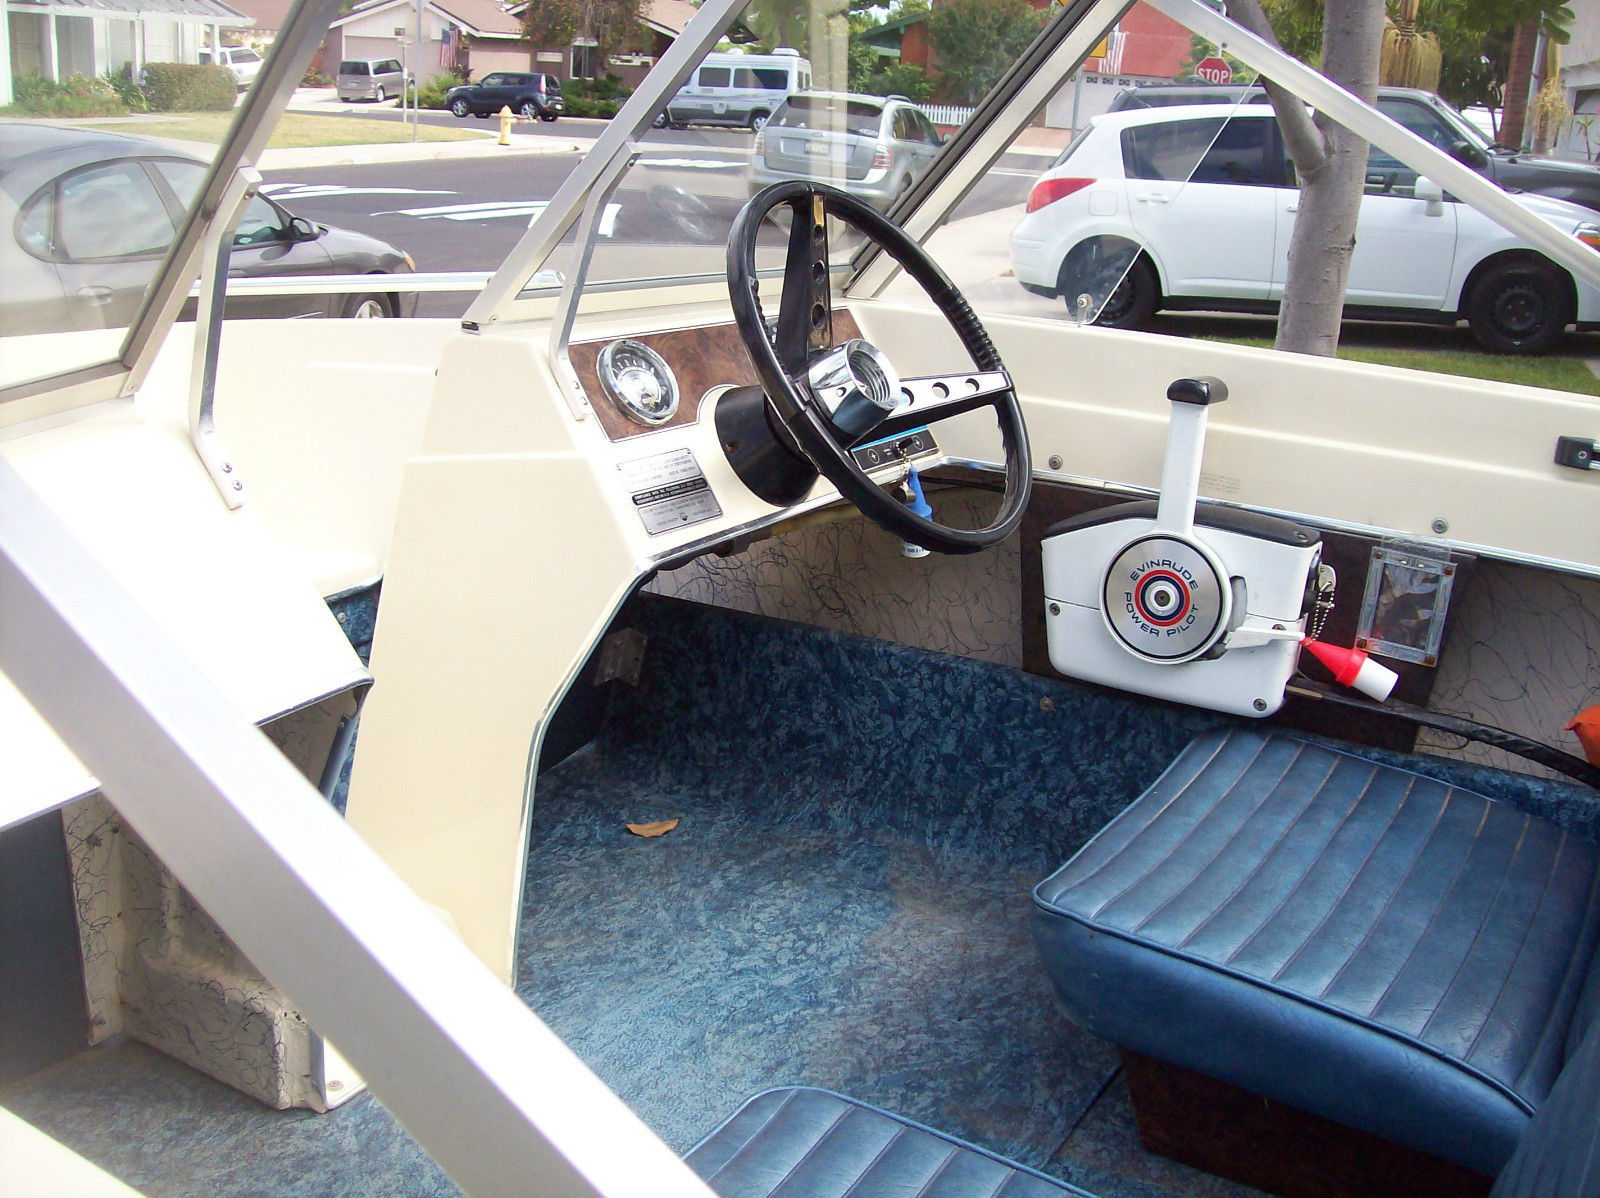 Glastron Aqua Lift 1974 for sale for $2,500 - Boats-from 